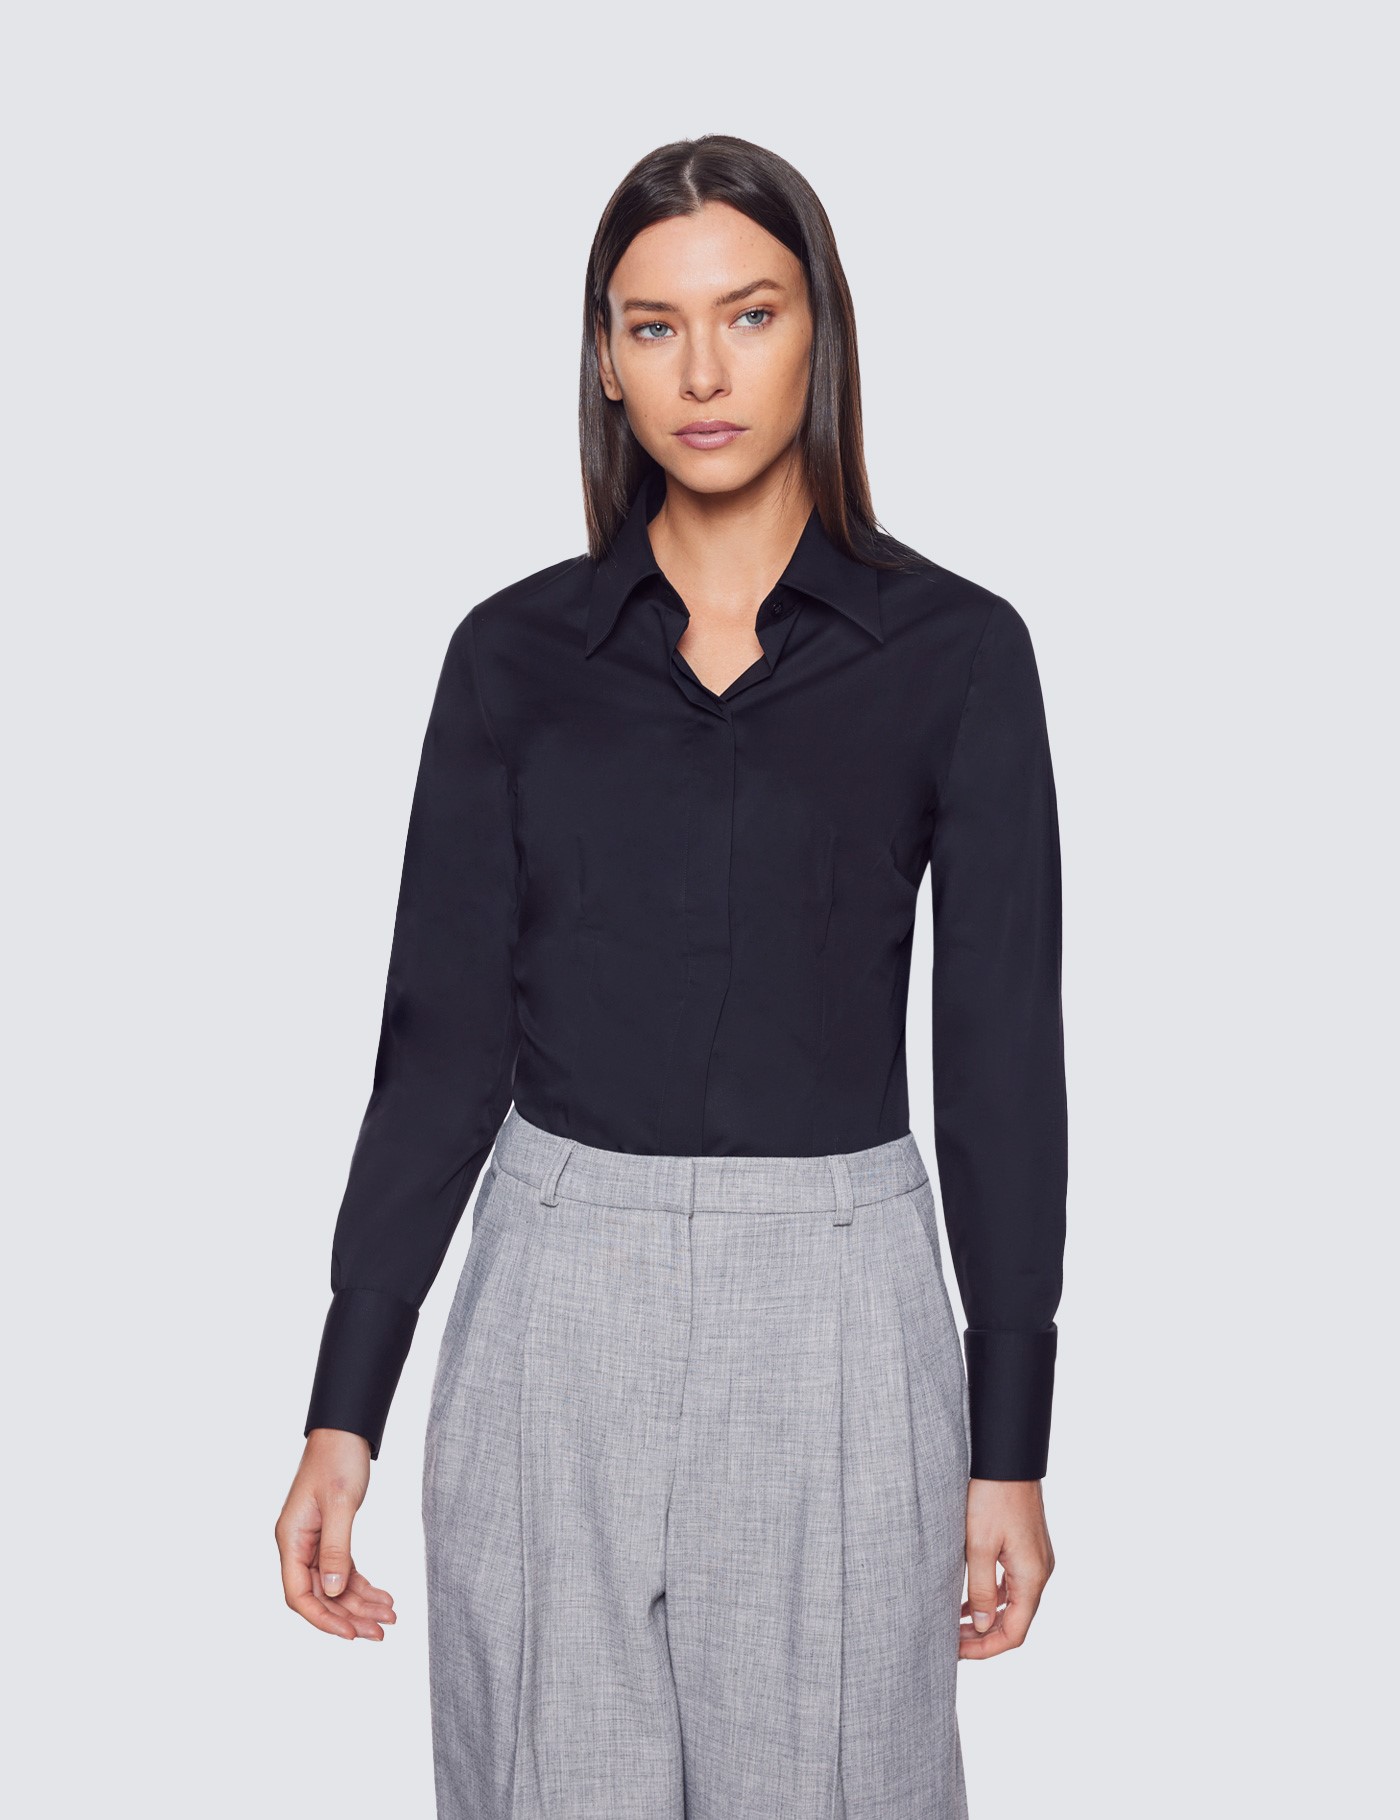 Women's Black Fitted Cotton Stretch Shirt With Concealed Placket